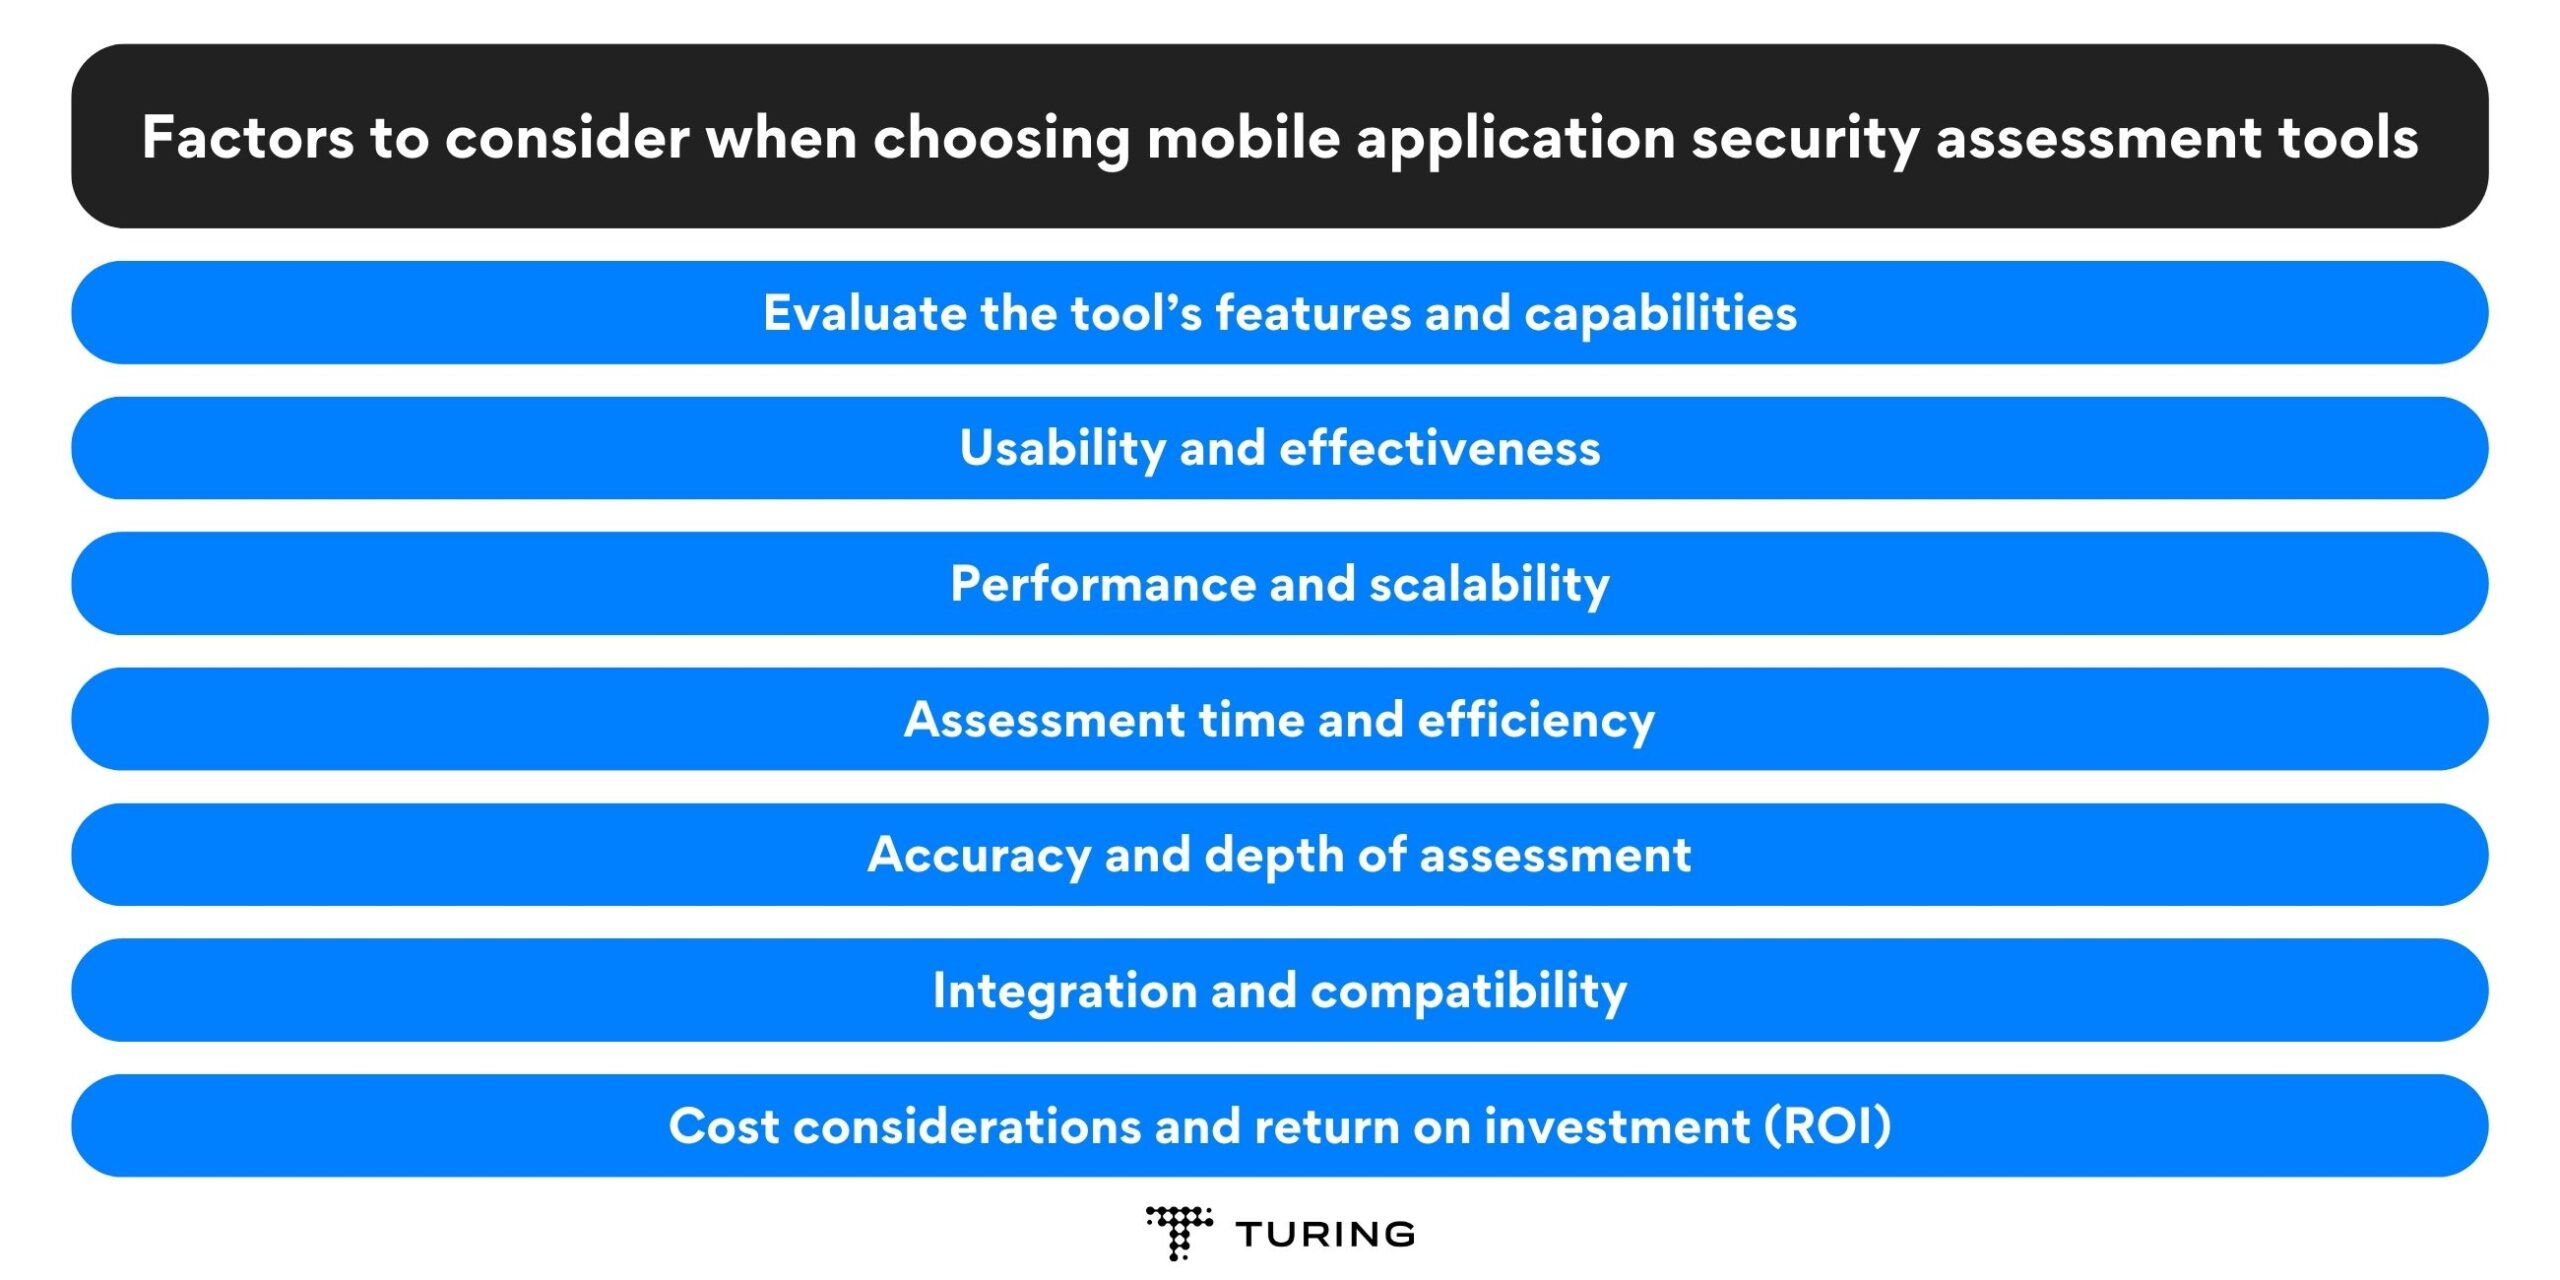 Factors to consider when choosing mobile application security assessment tools